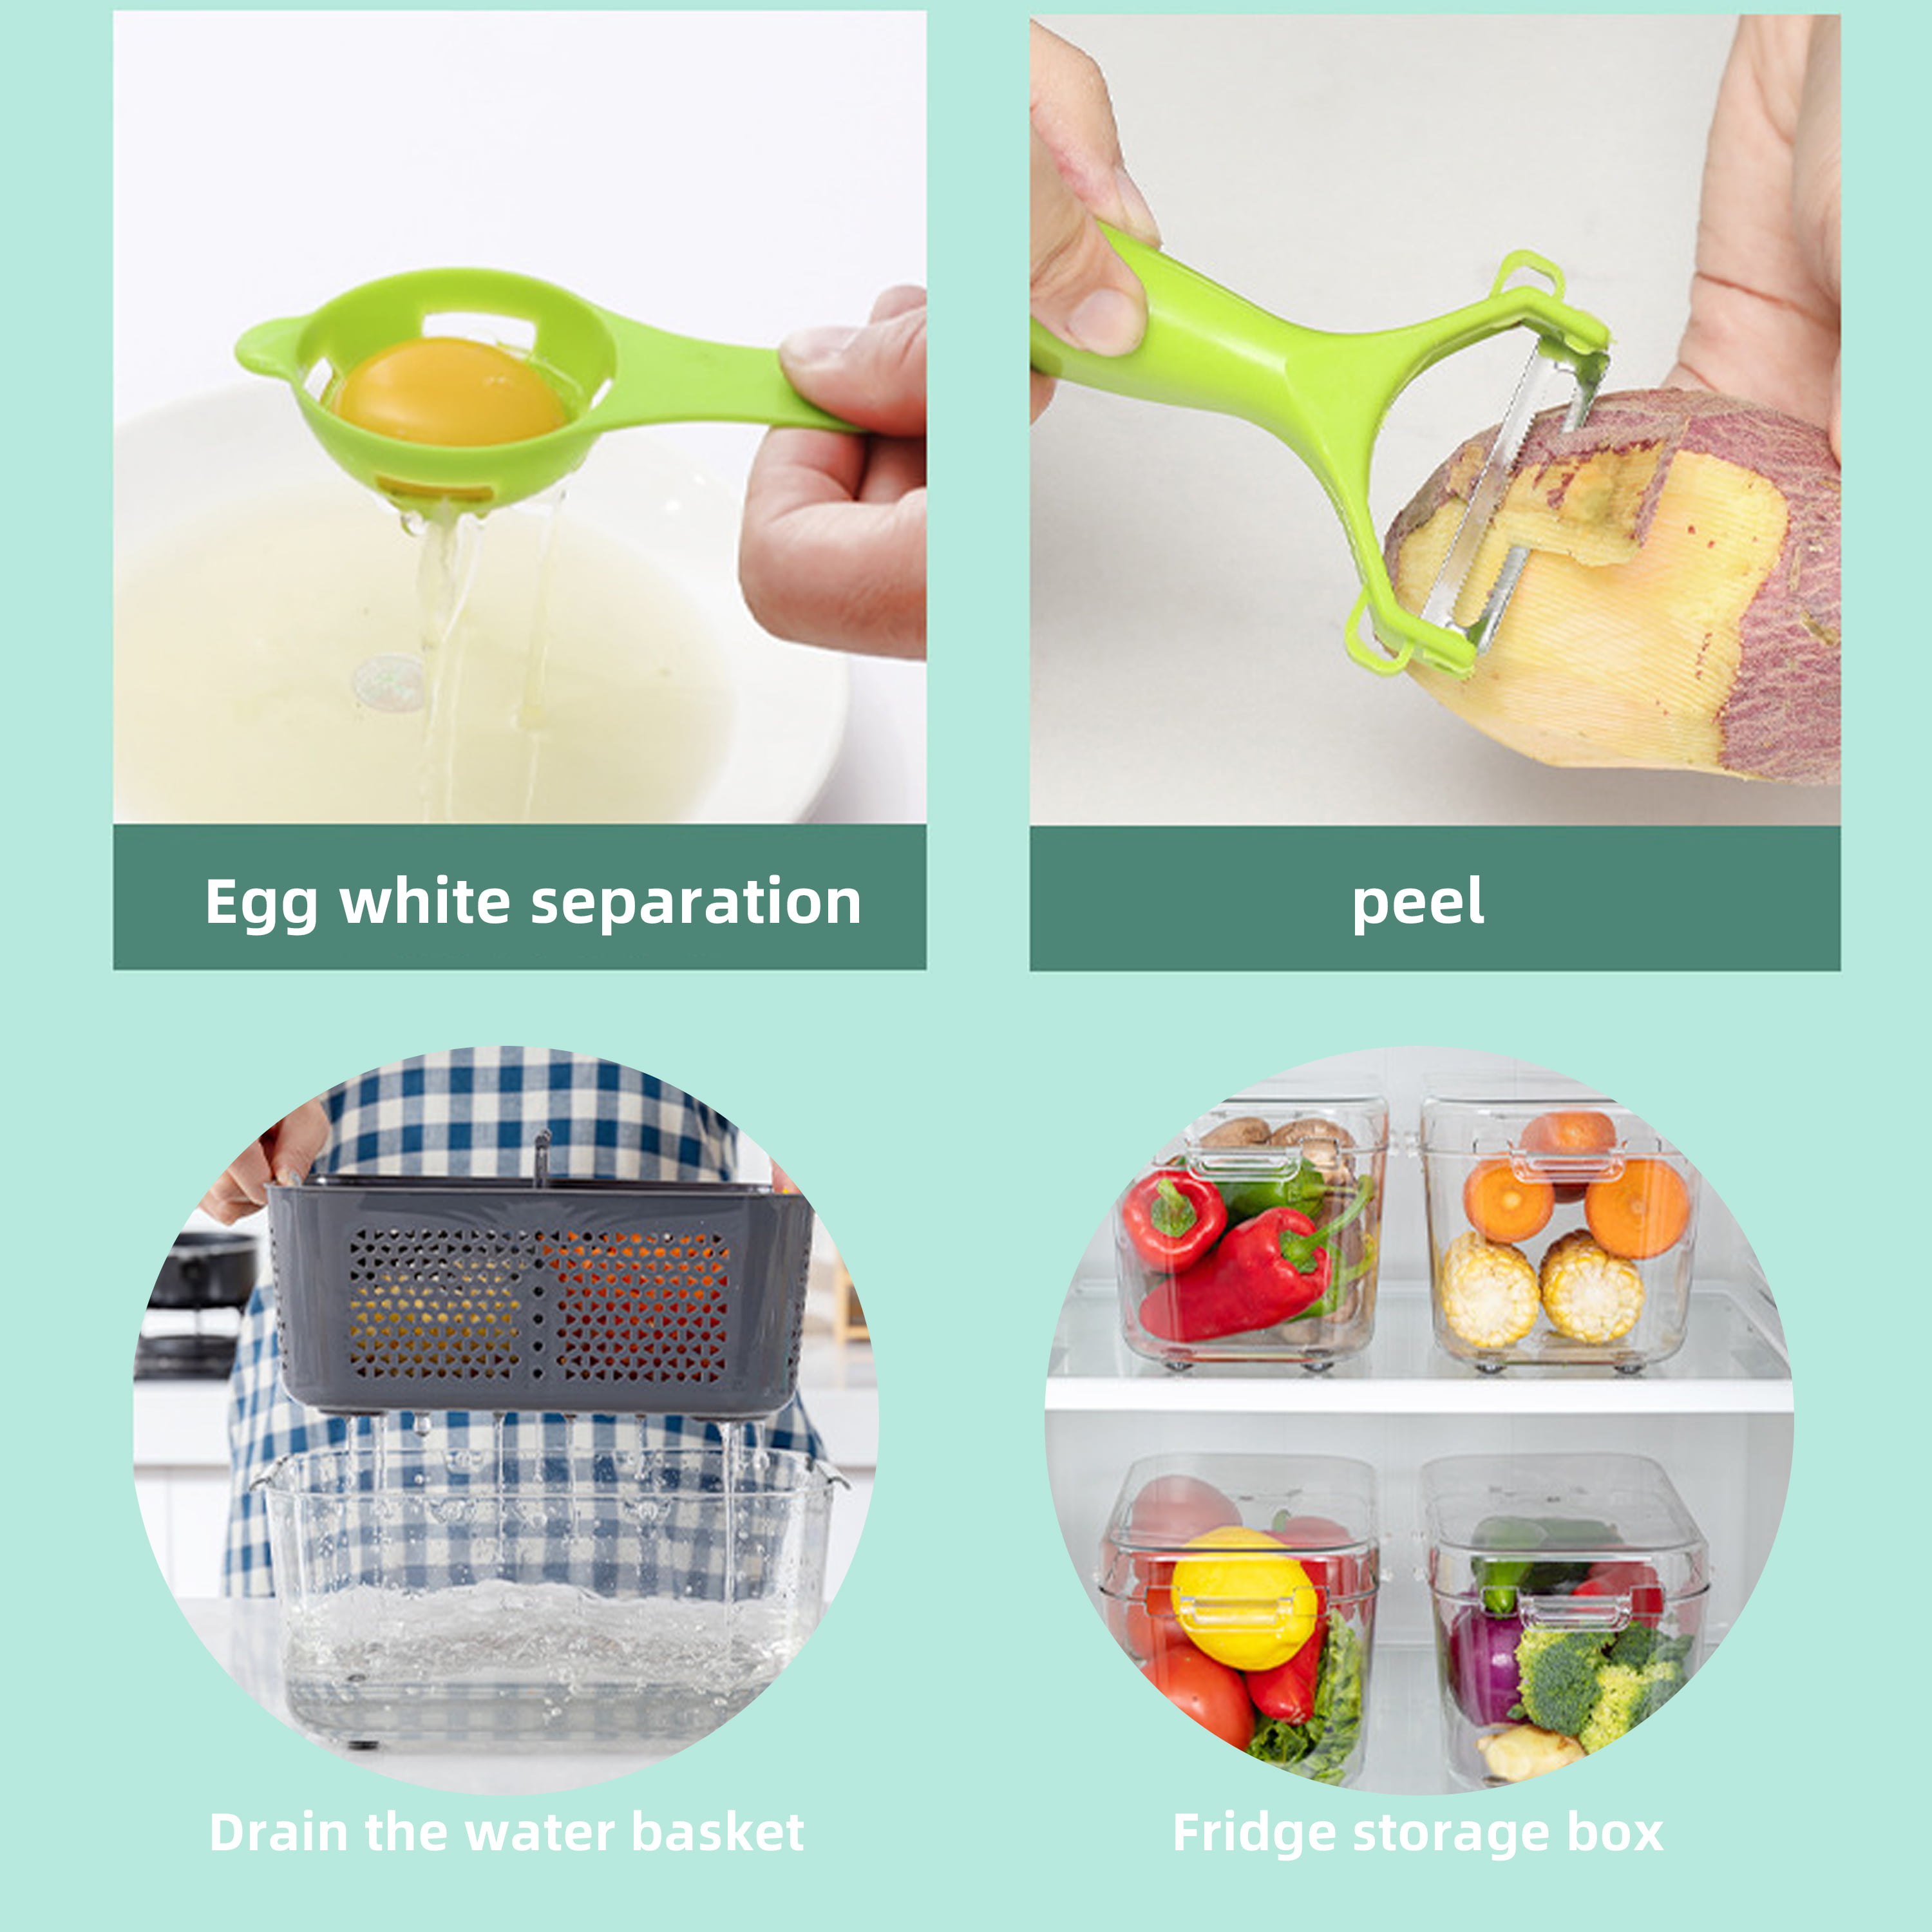 22 in 1 Vegetable Chopper with Container, TENBOK 11 Stainless Steel Blades  Vegetable Slicer, Onion Mincer Chopper, Cutter, Dicer, Egg Separator, 2